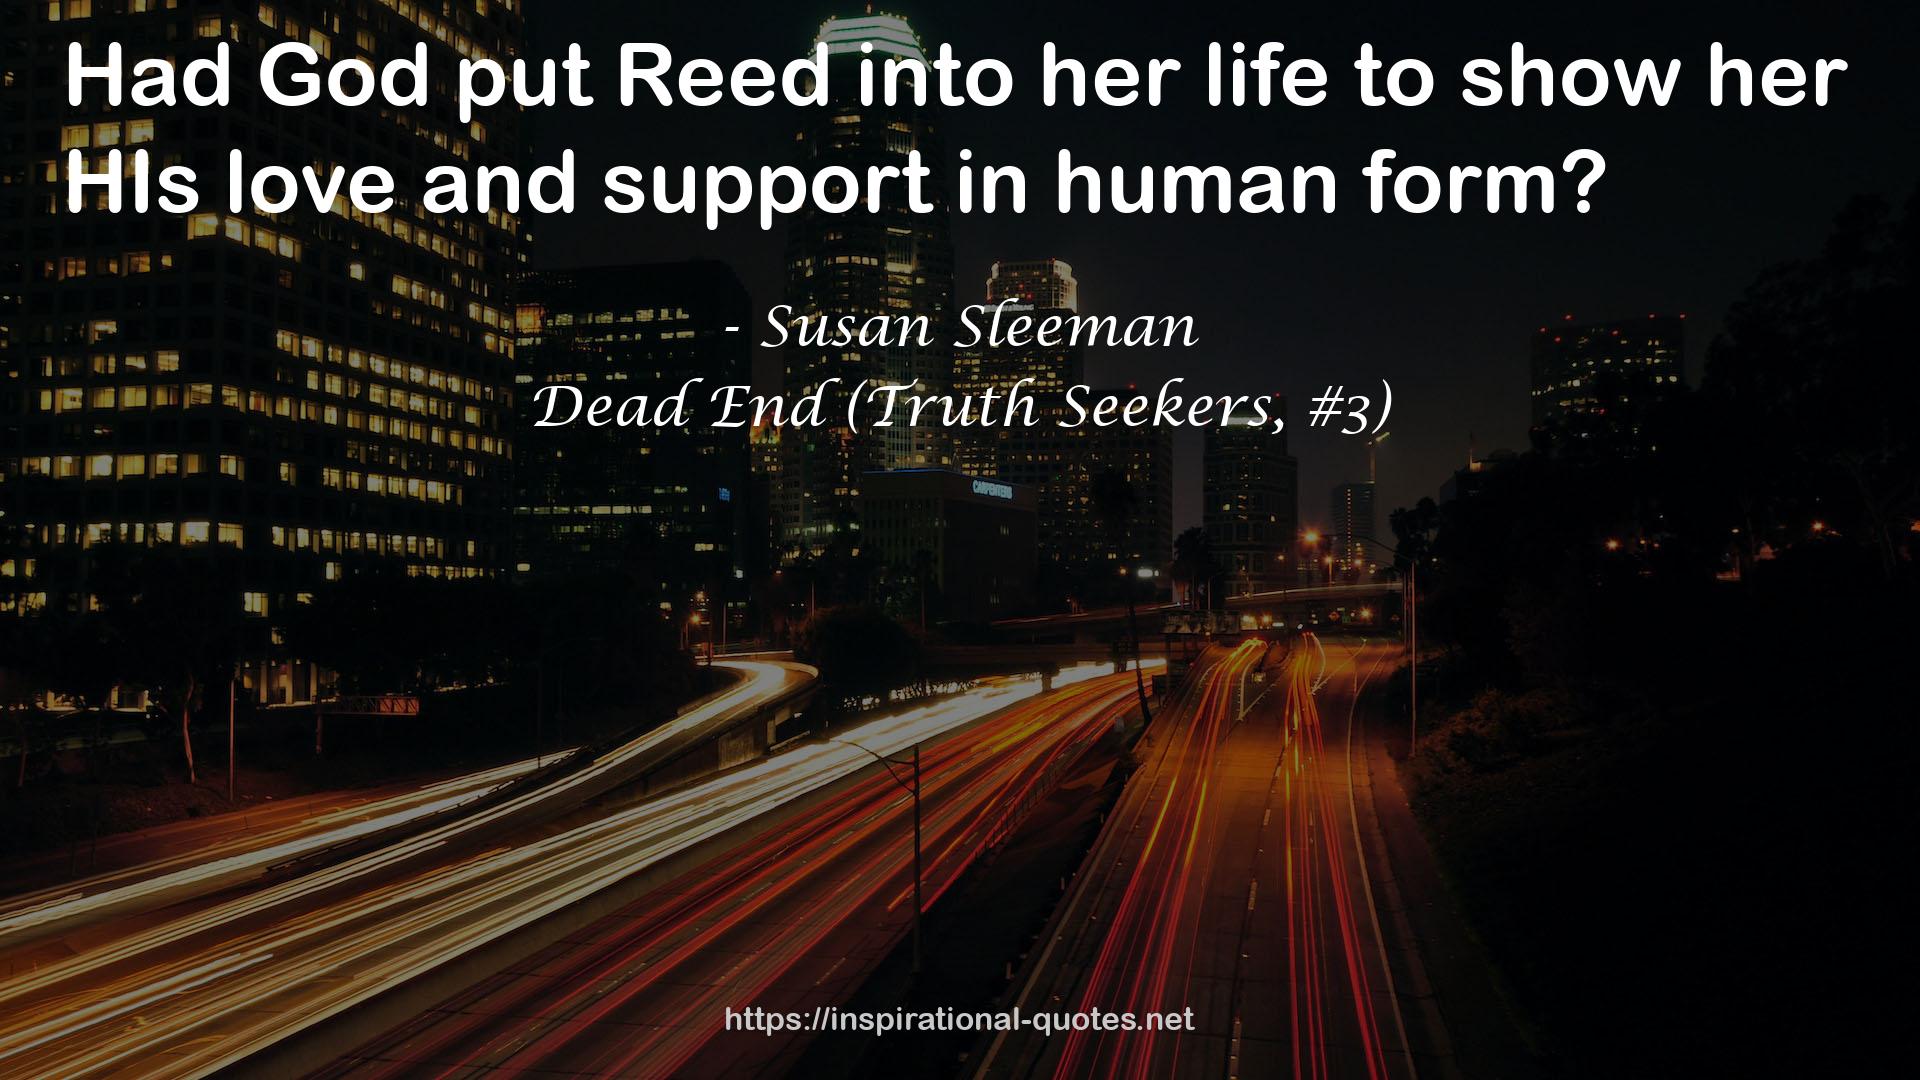 Dead End (Truth Seekers, #3) QUOTES